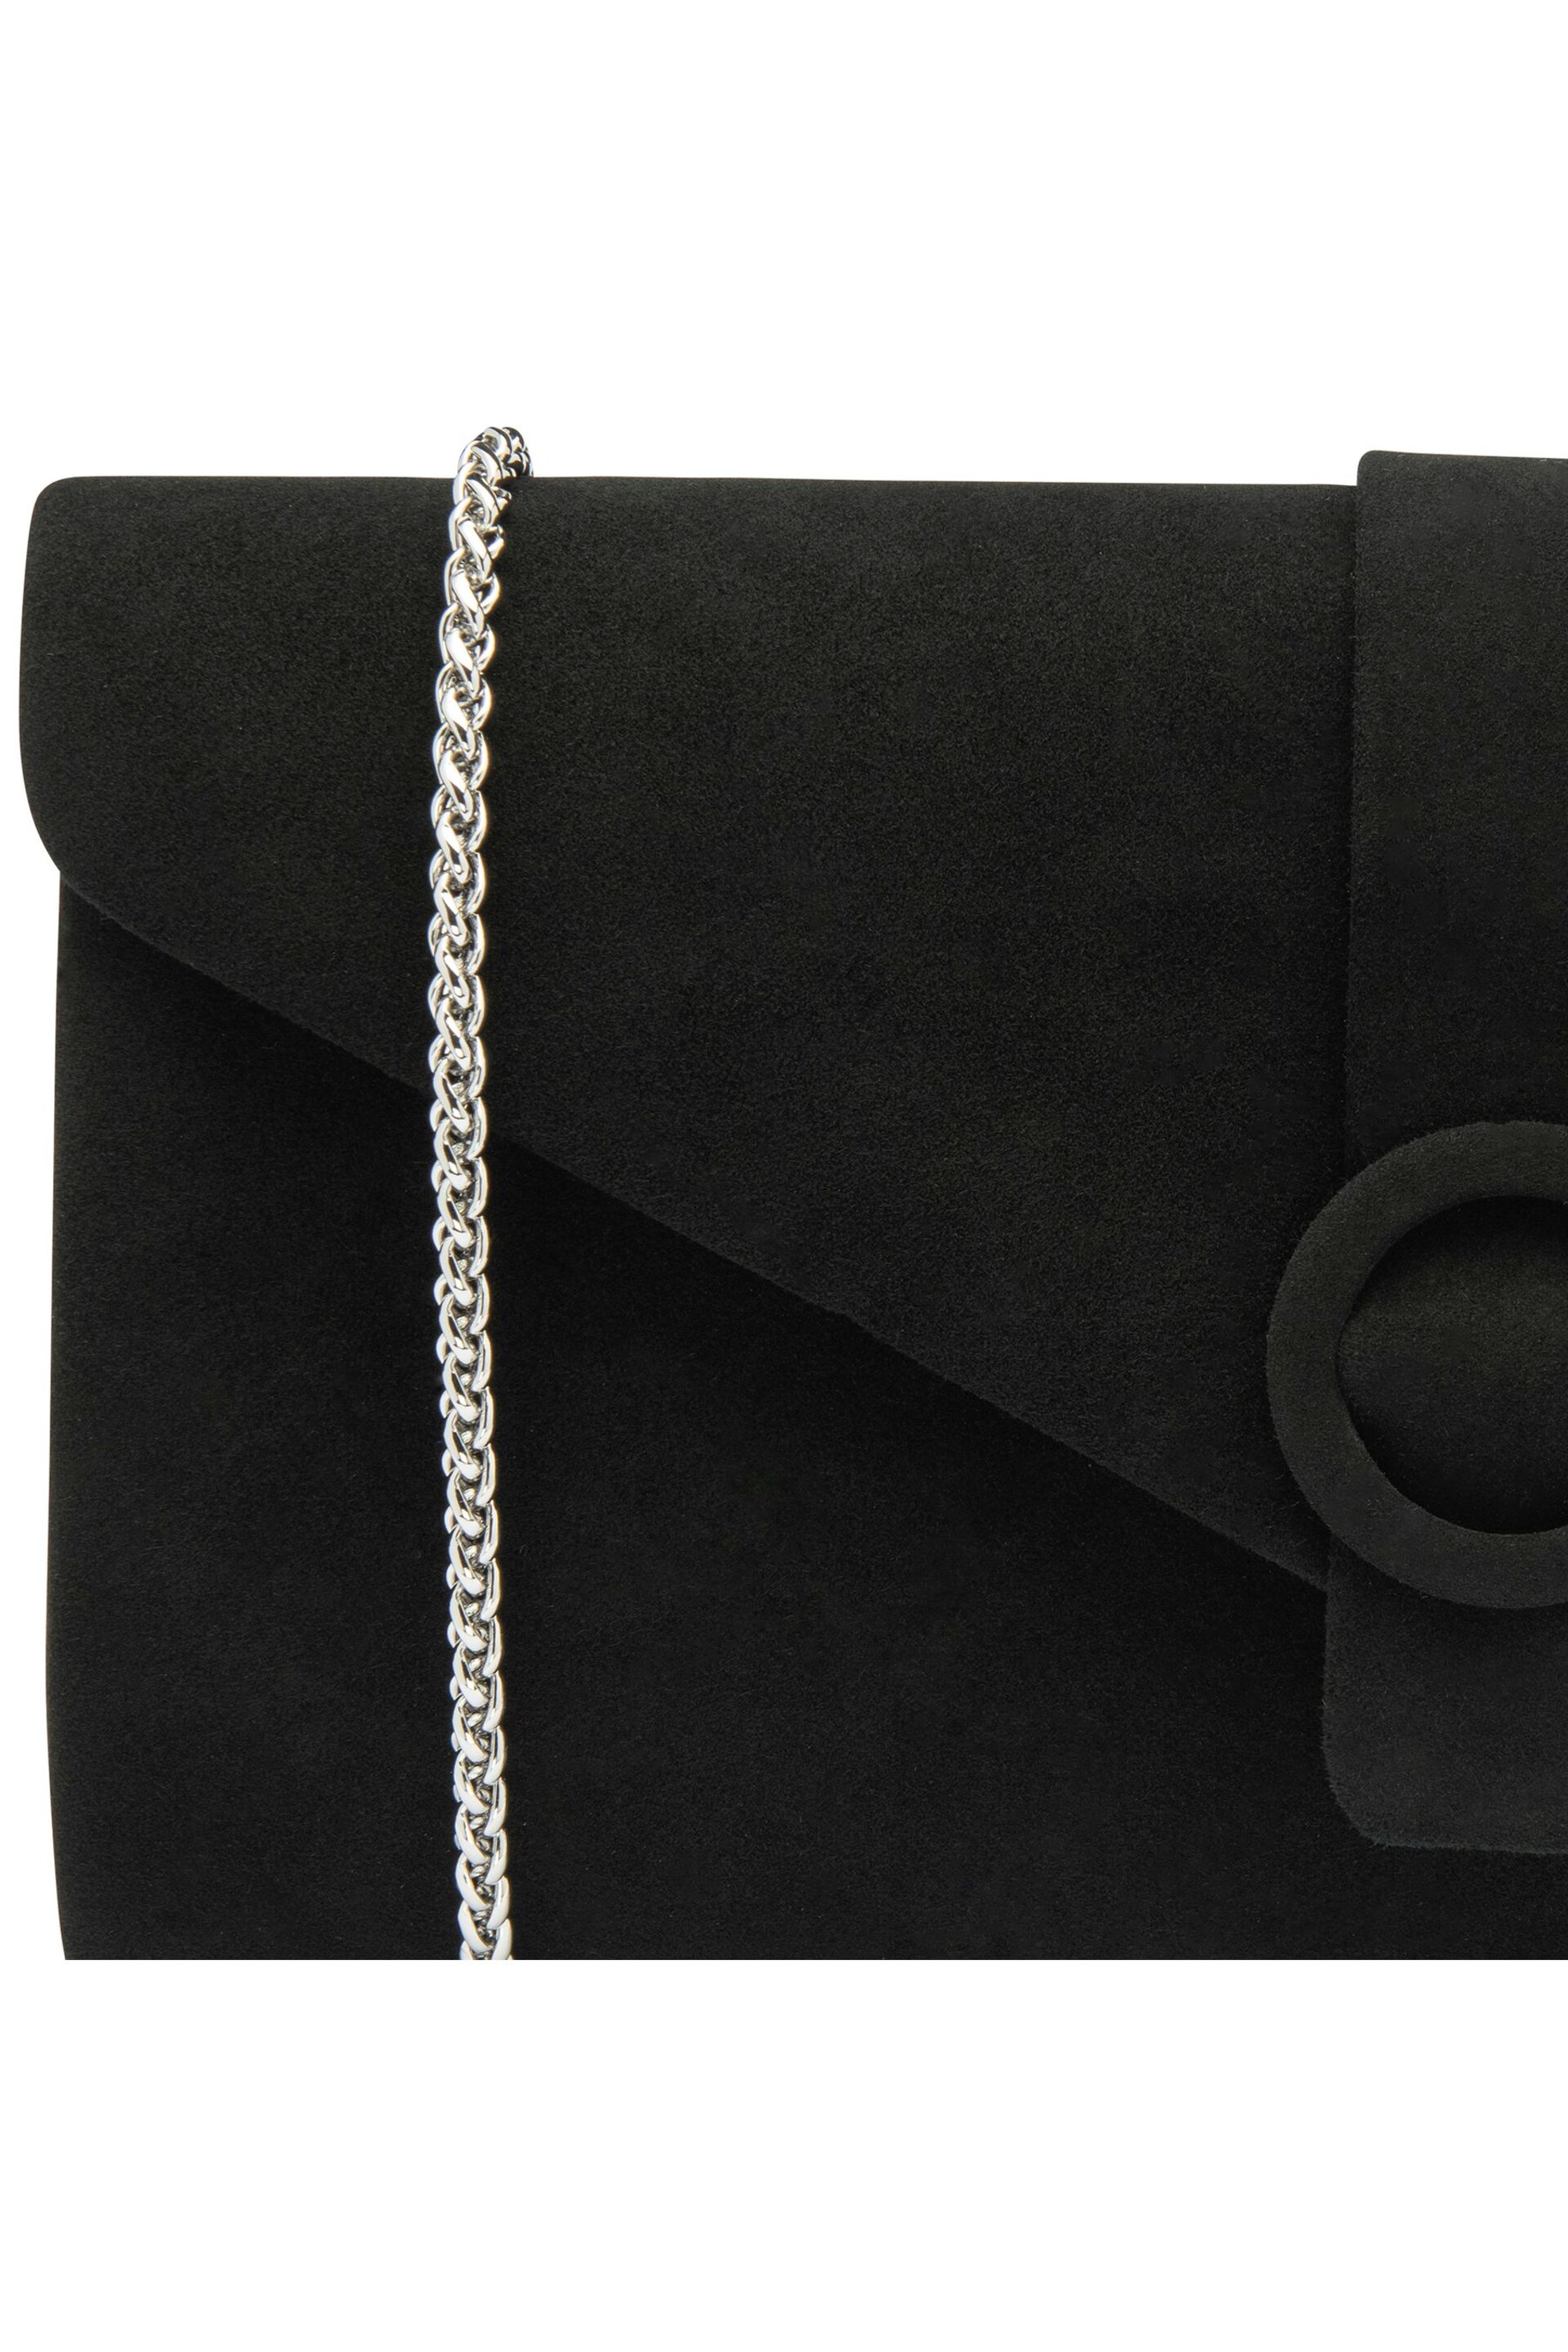 Lotus Black Clutch Bag With Chain - Image 3 of 4